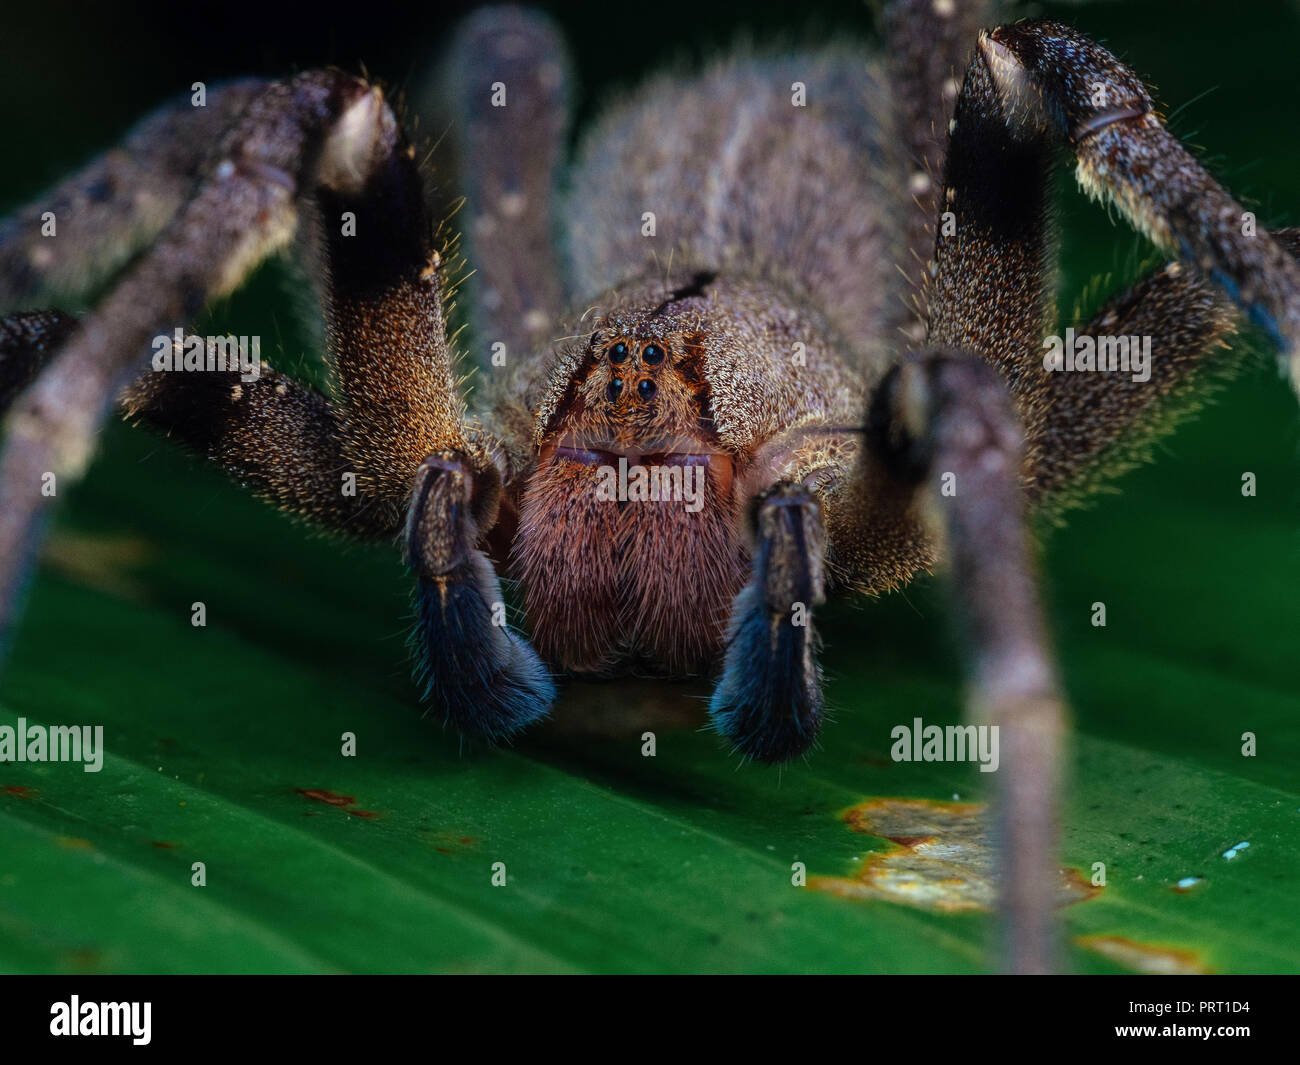 Phoneutria nigriventer (brazilian wandering spider, armadeira) frontal view macro, venomous spider responsible for some deaths in south america. Stock Photo